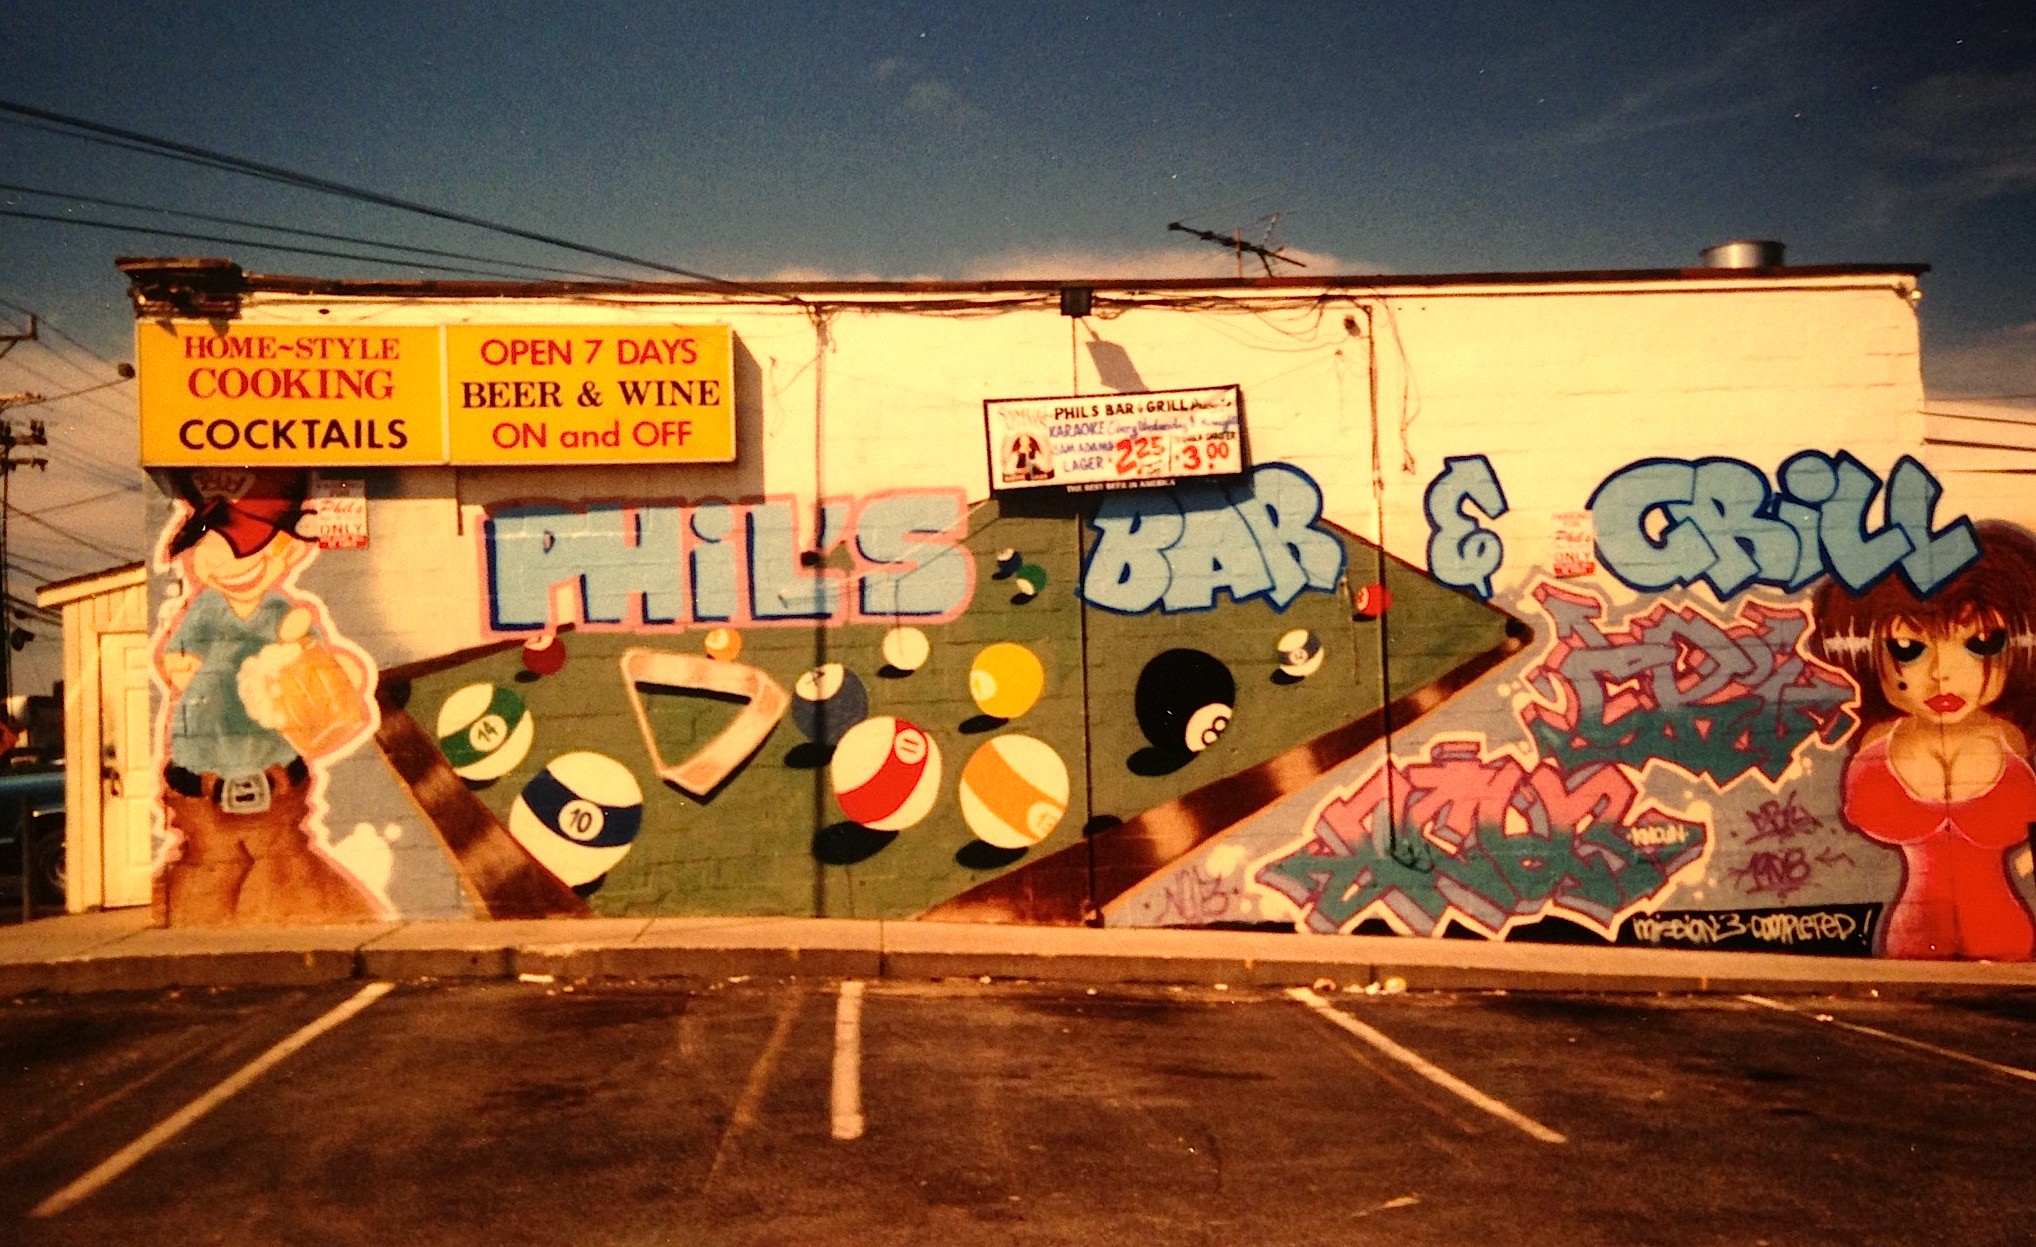 1998-Phil's Bar &amp; Grill was a local neighborhood bar located at the corner of Rhode Island Ave. &amp; Route 1 in the City of Beltsville. During the production stage, several calls were made to alert owner about the vandalism taking place at thei…